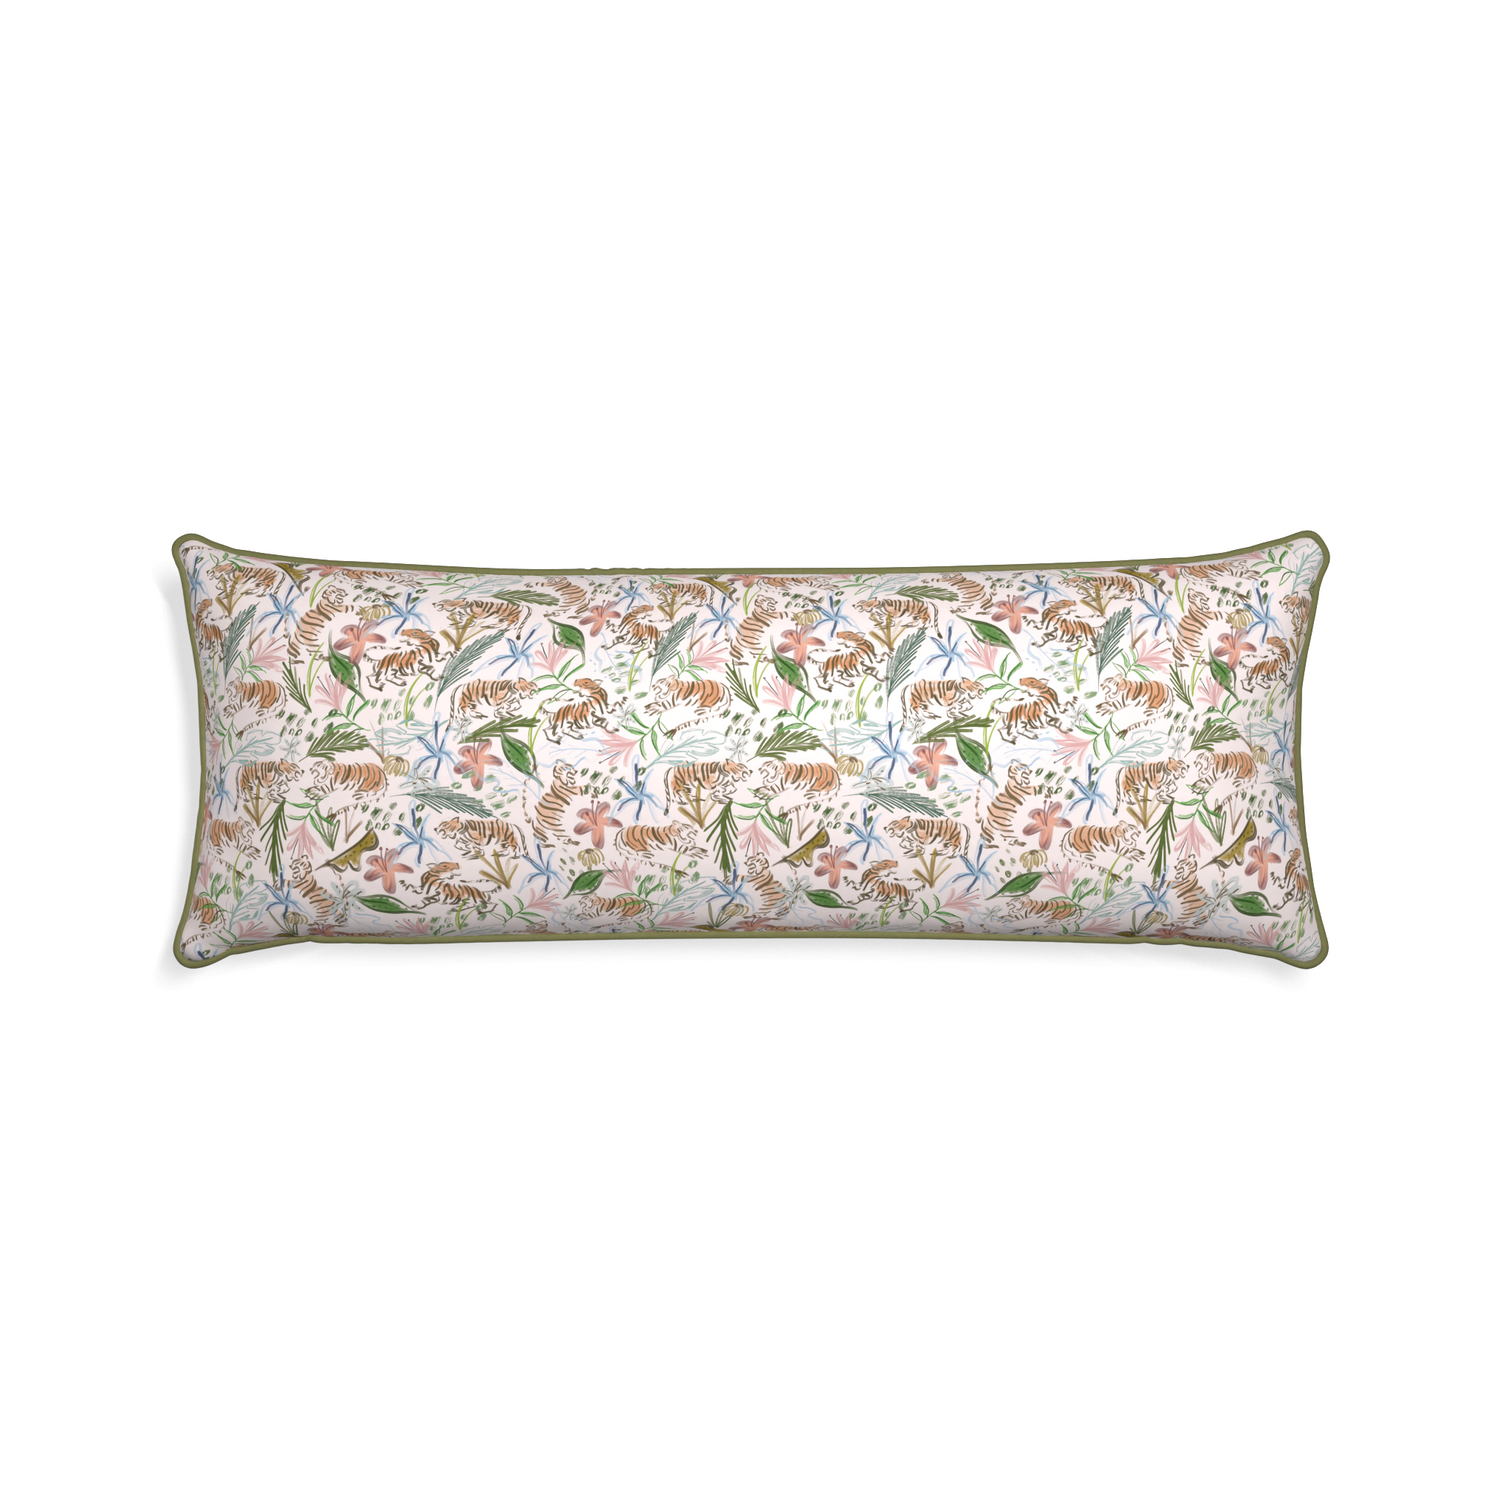 Xl-lumbar frida pink custom pink chinoiserie tigerpillow with moss piping on white background